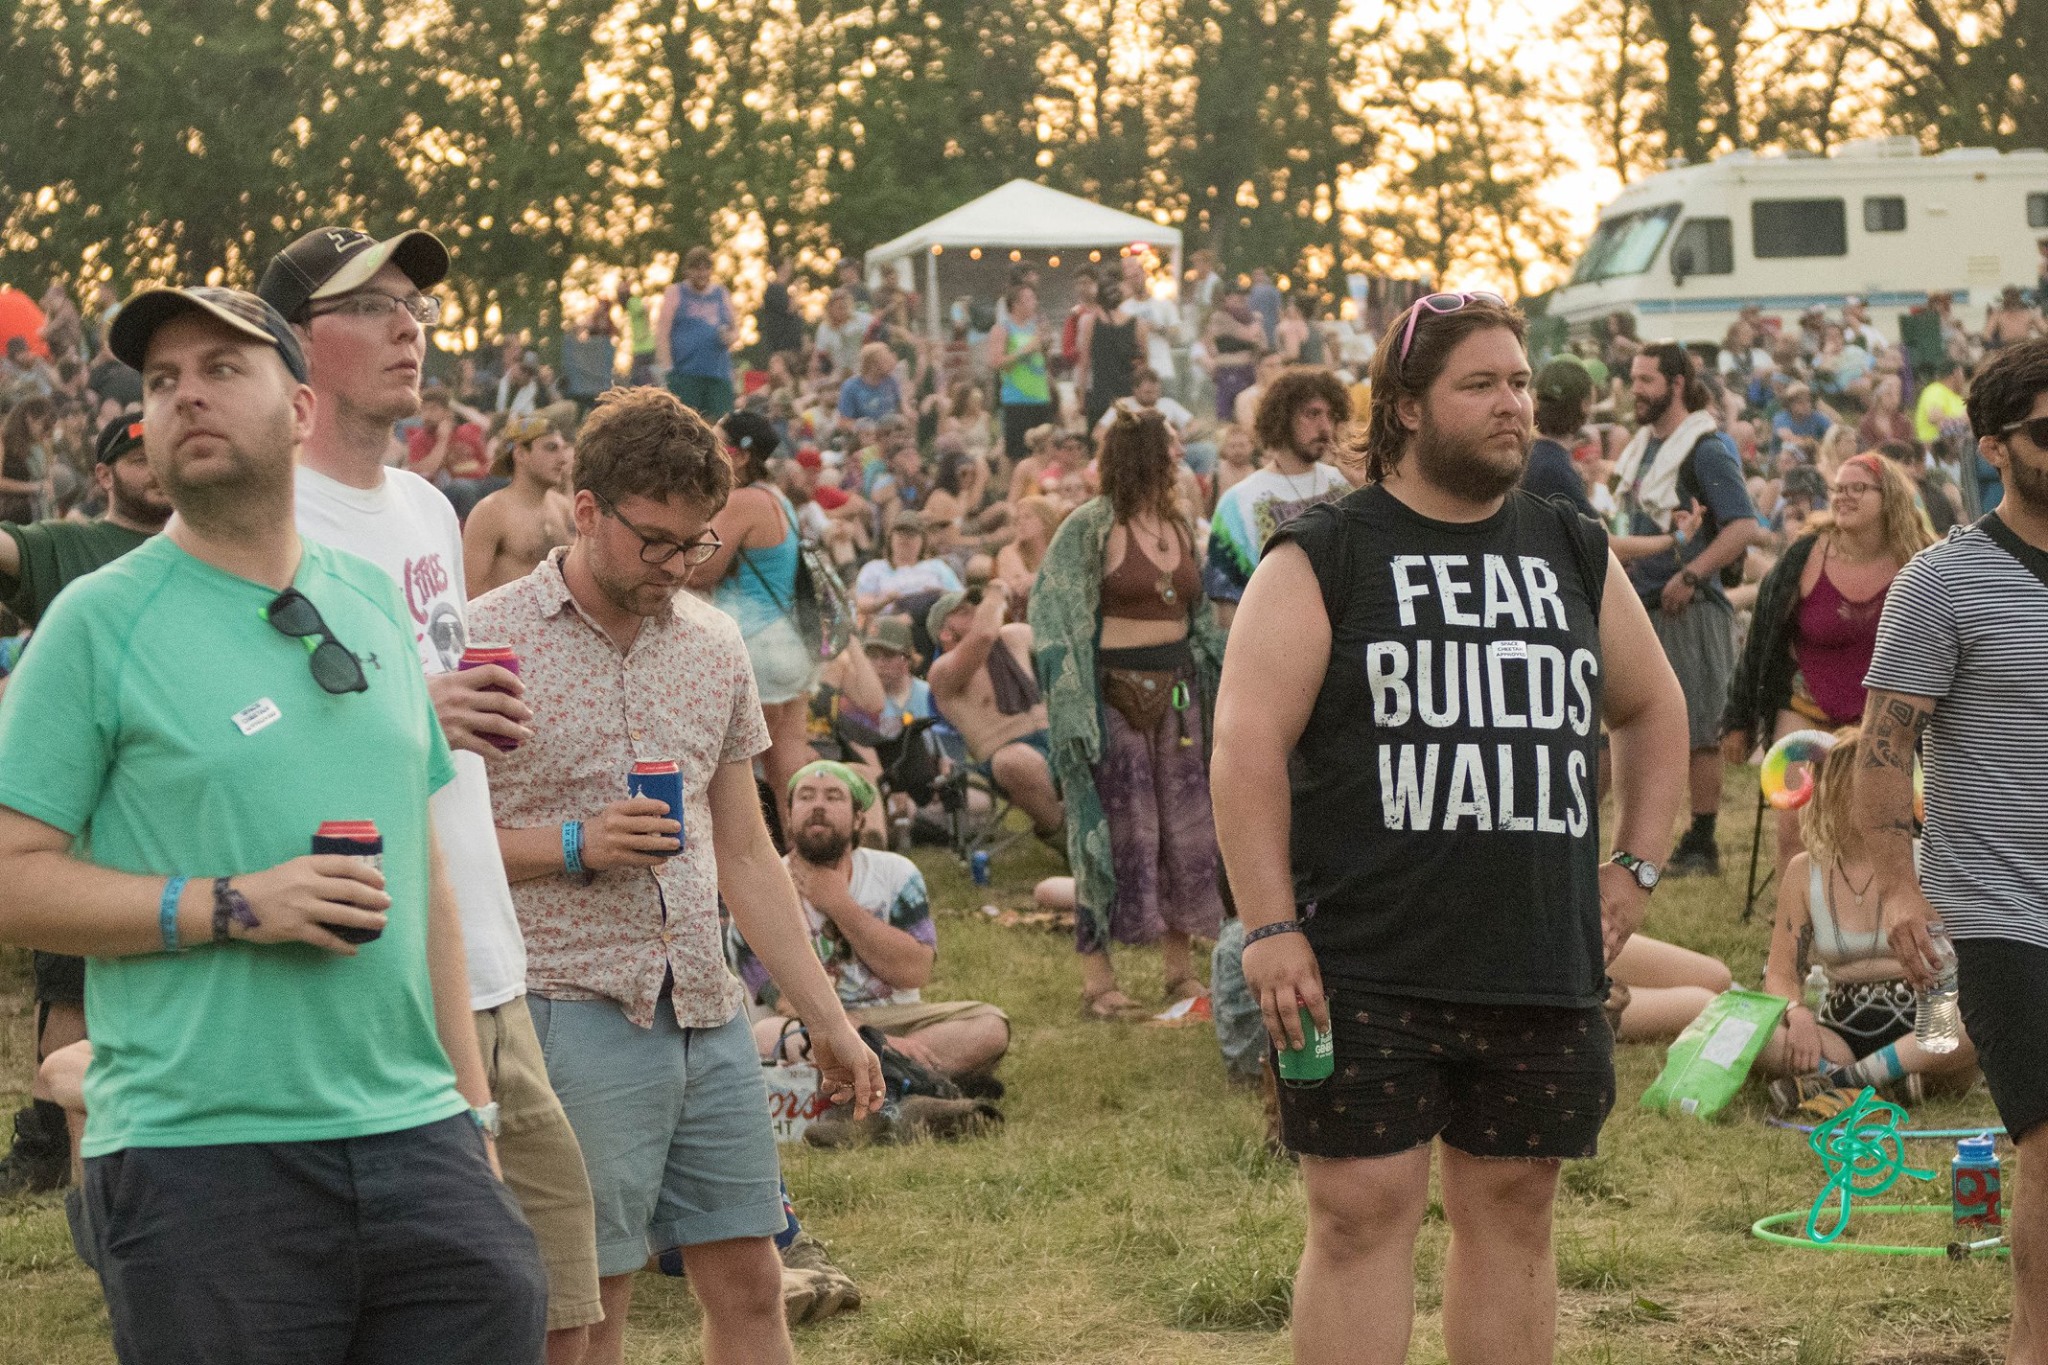 great shirt, brother! | Summer Camp Music Festival